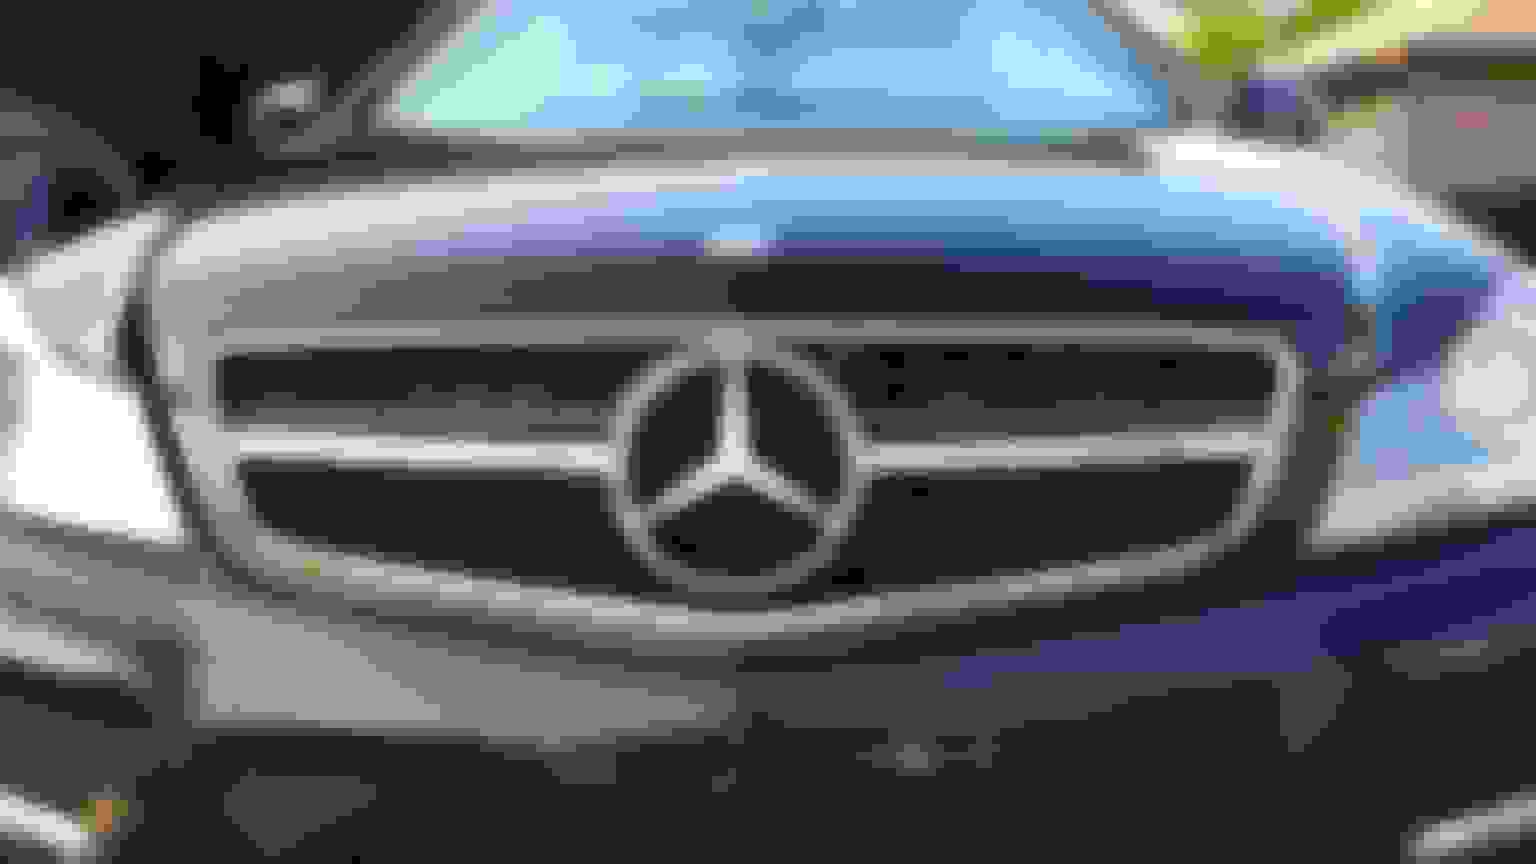 How to change reductor ring - ABS ring on Mercedes e320 w211 